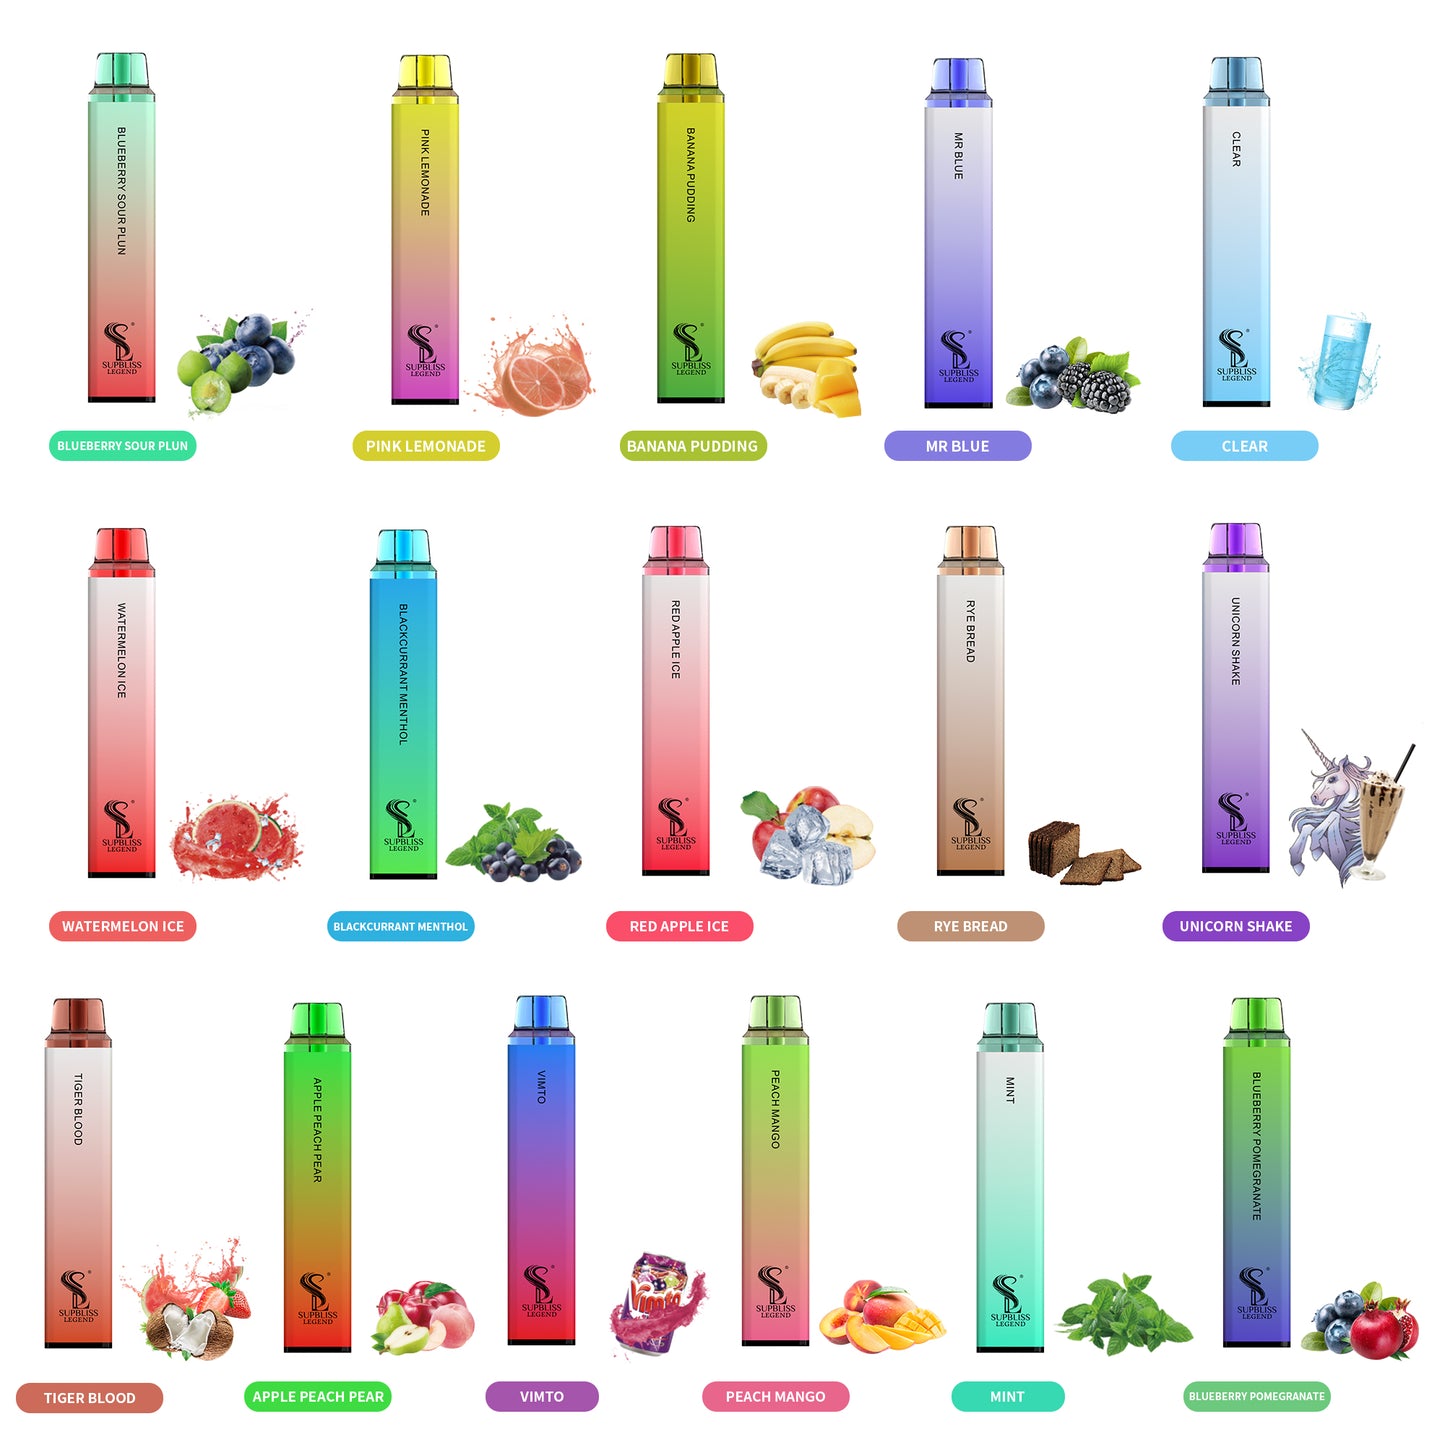 Supbliss Legend 3800 Disposable Vape, 16 Flavors and 4 Nicotine Strengths Available